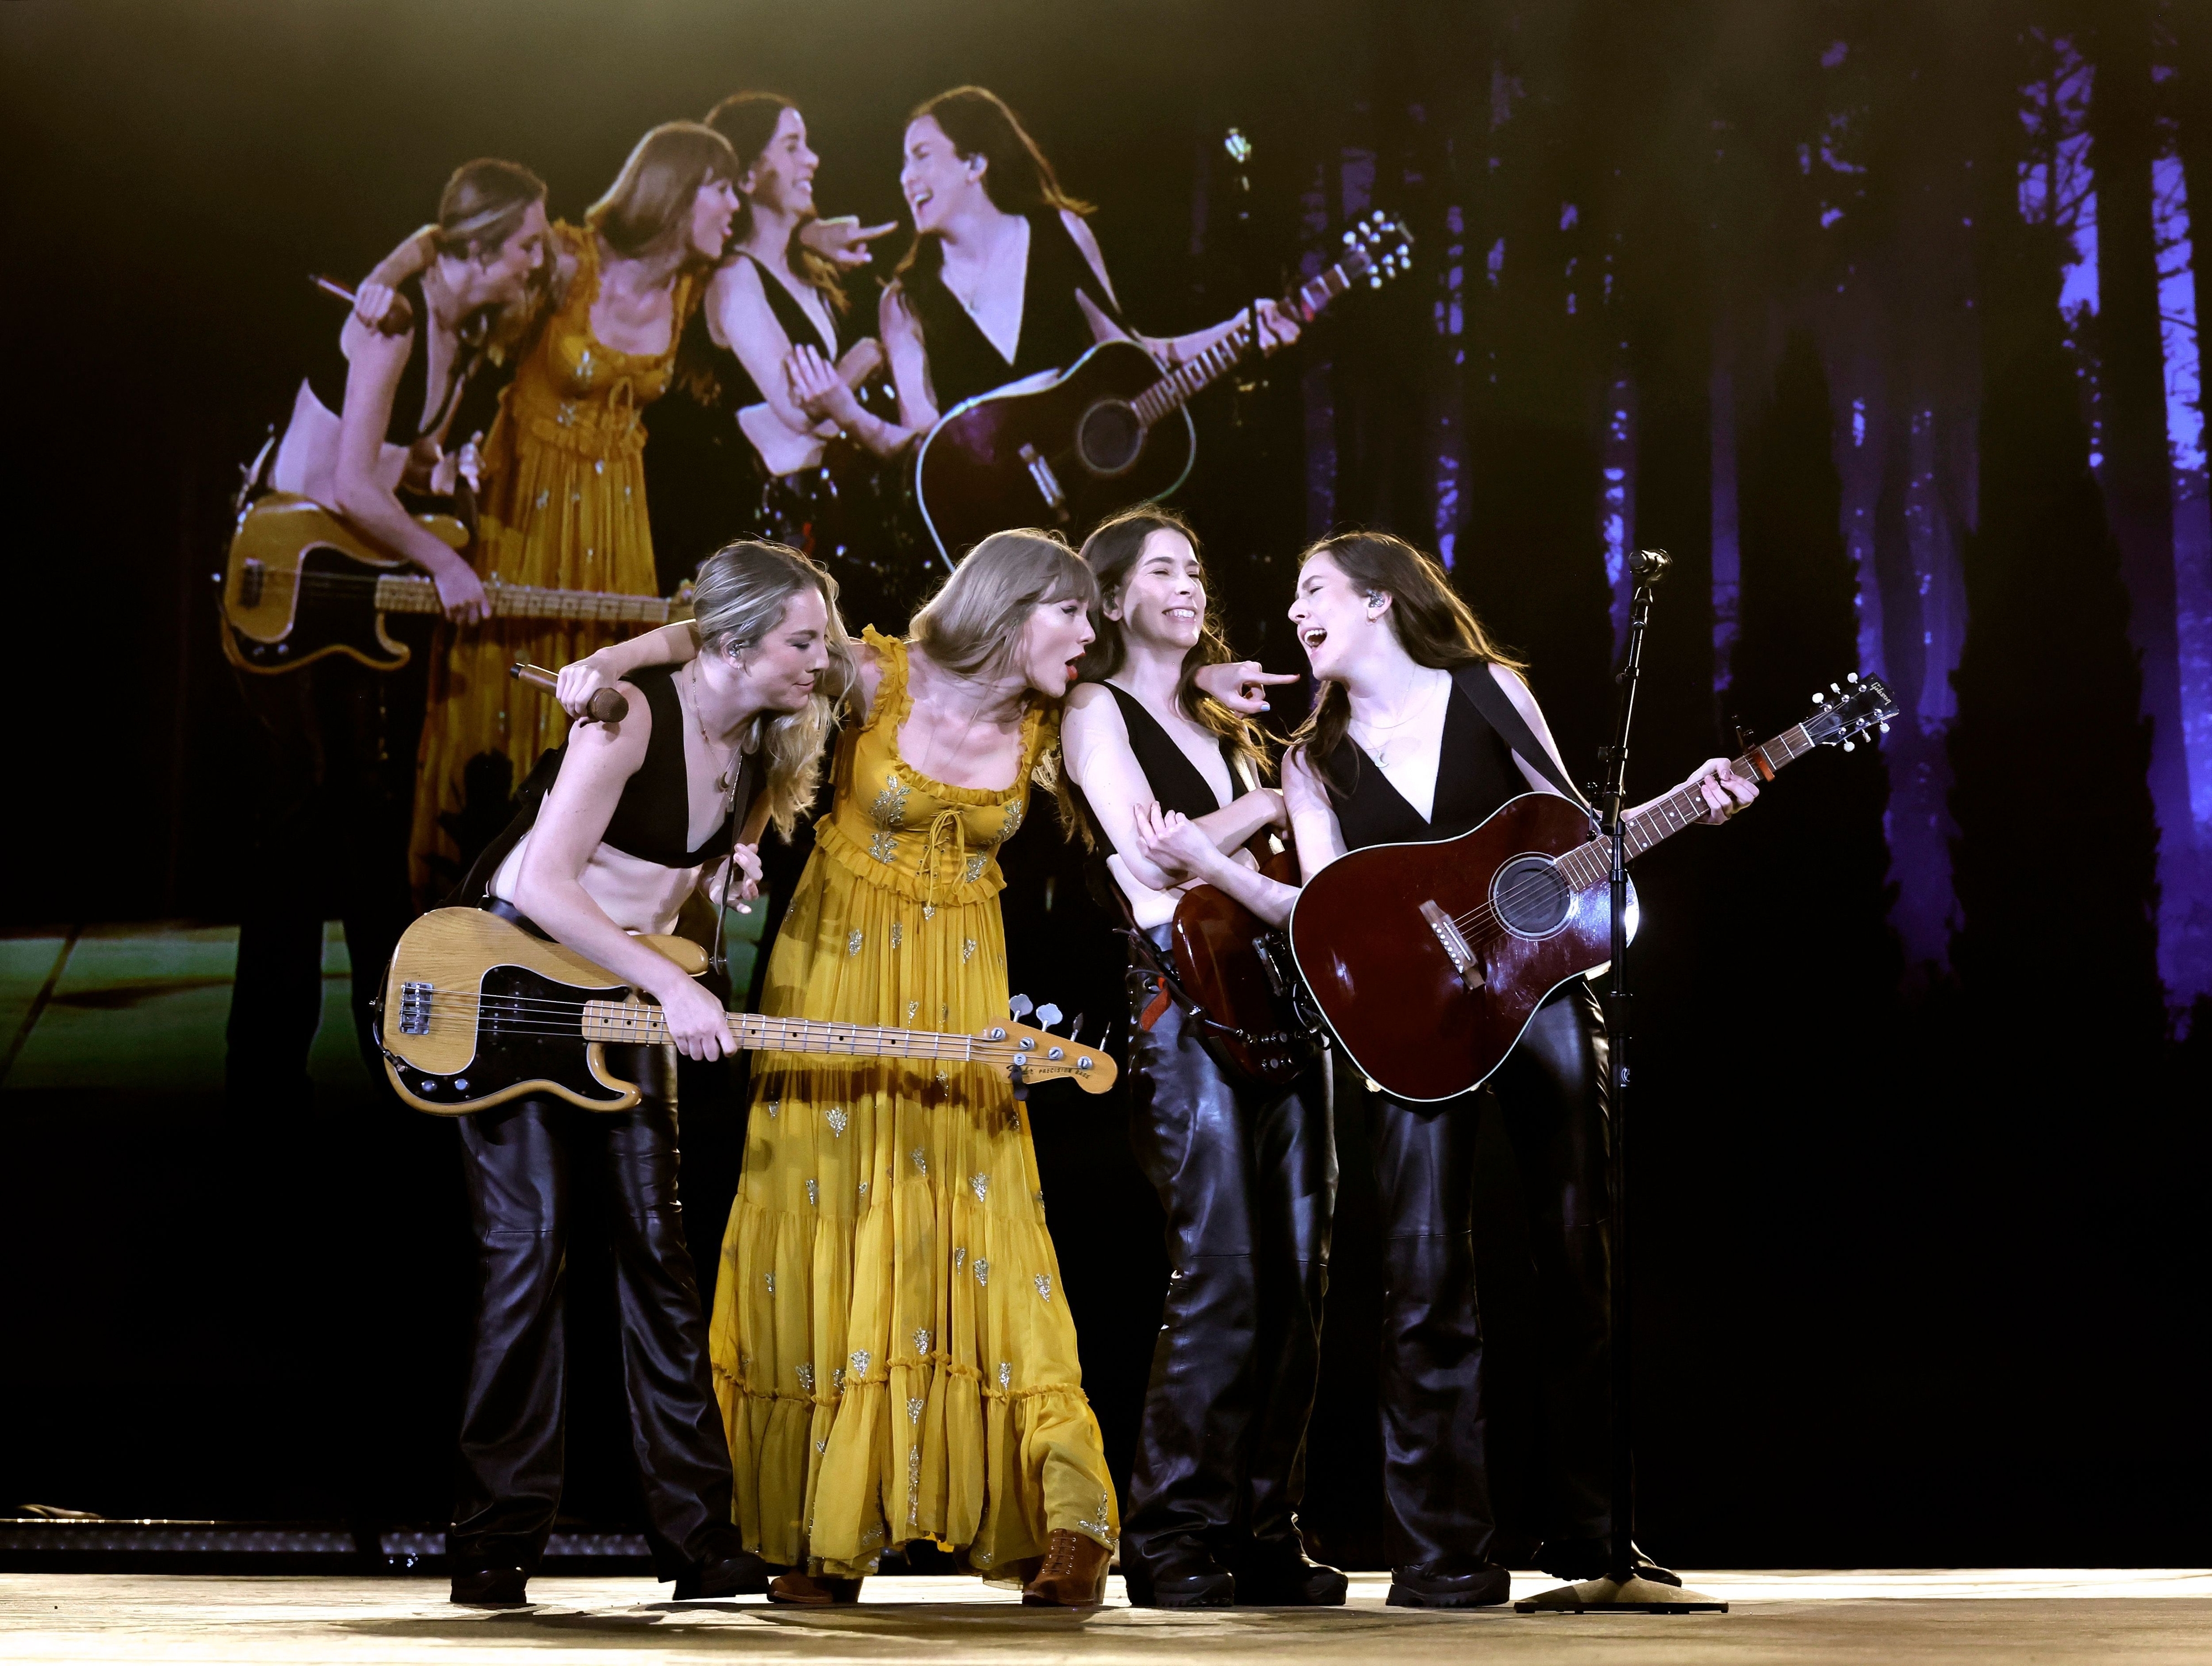 taylor on stage with the band